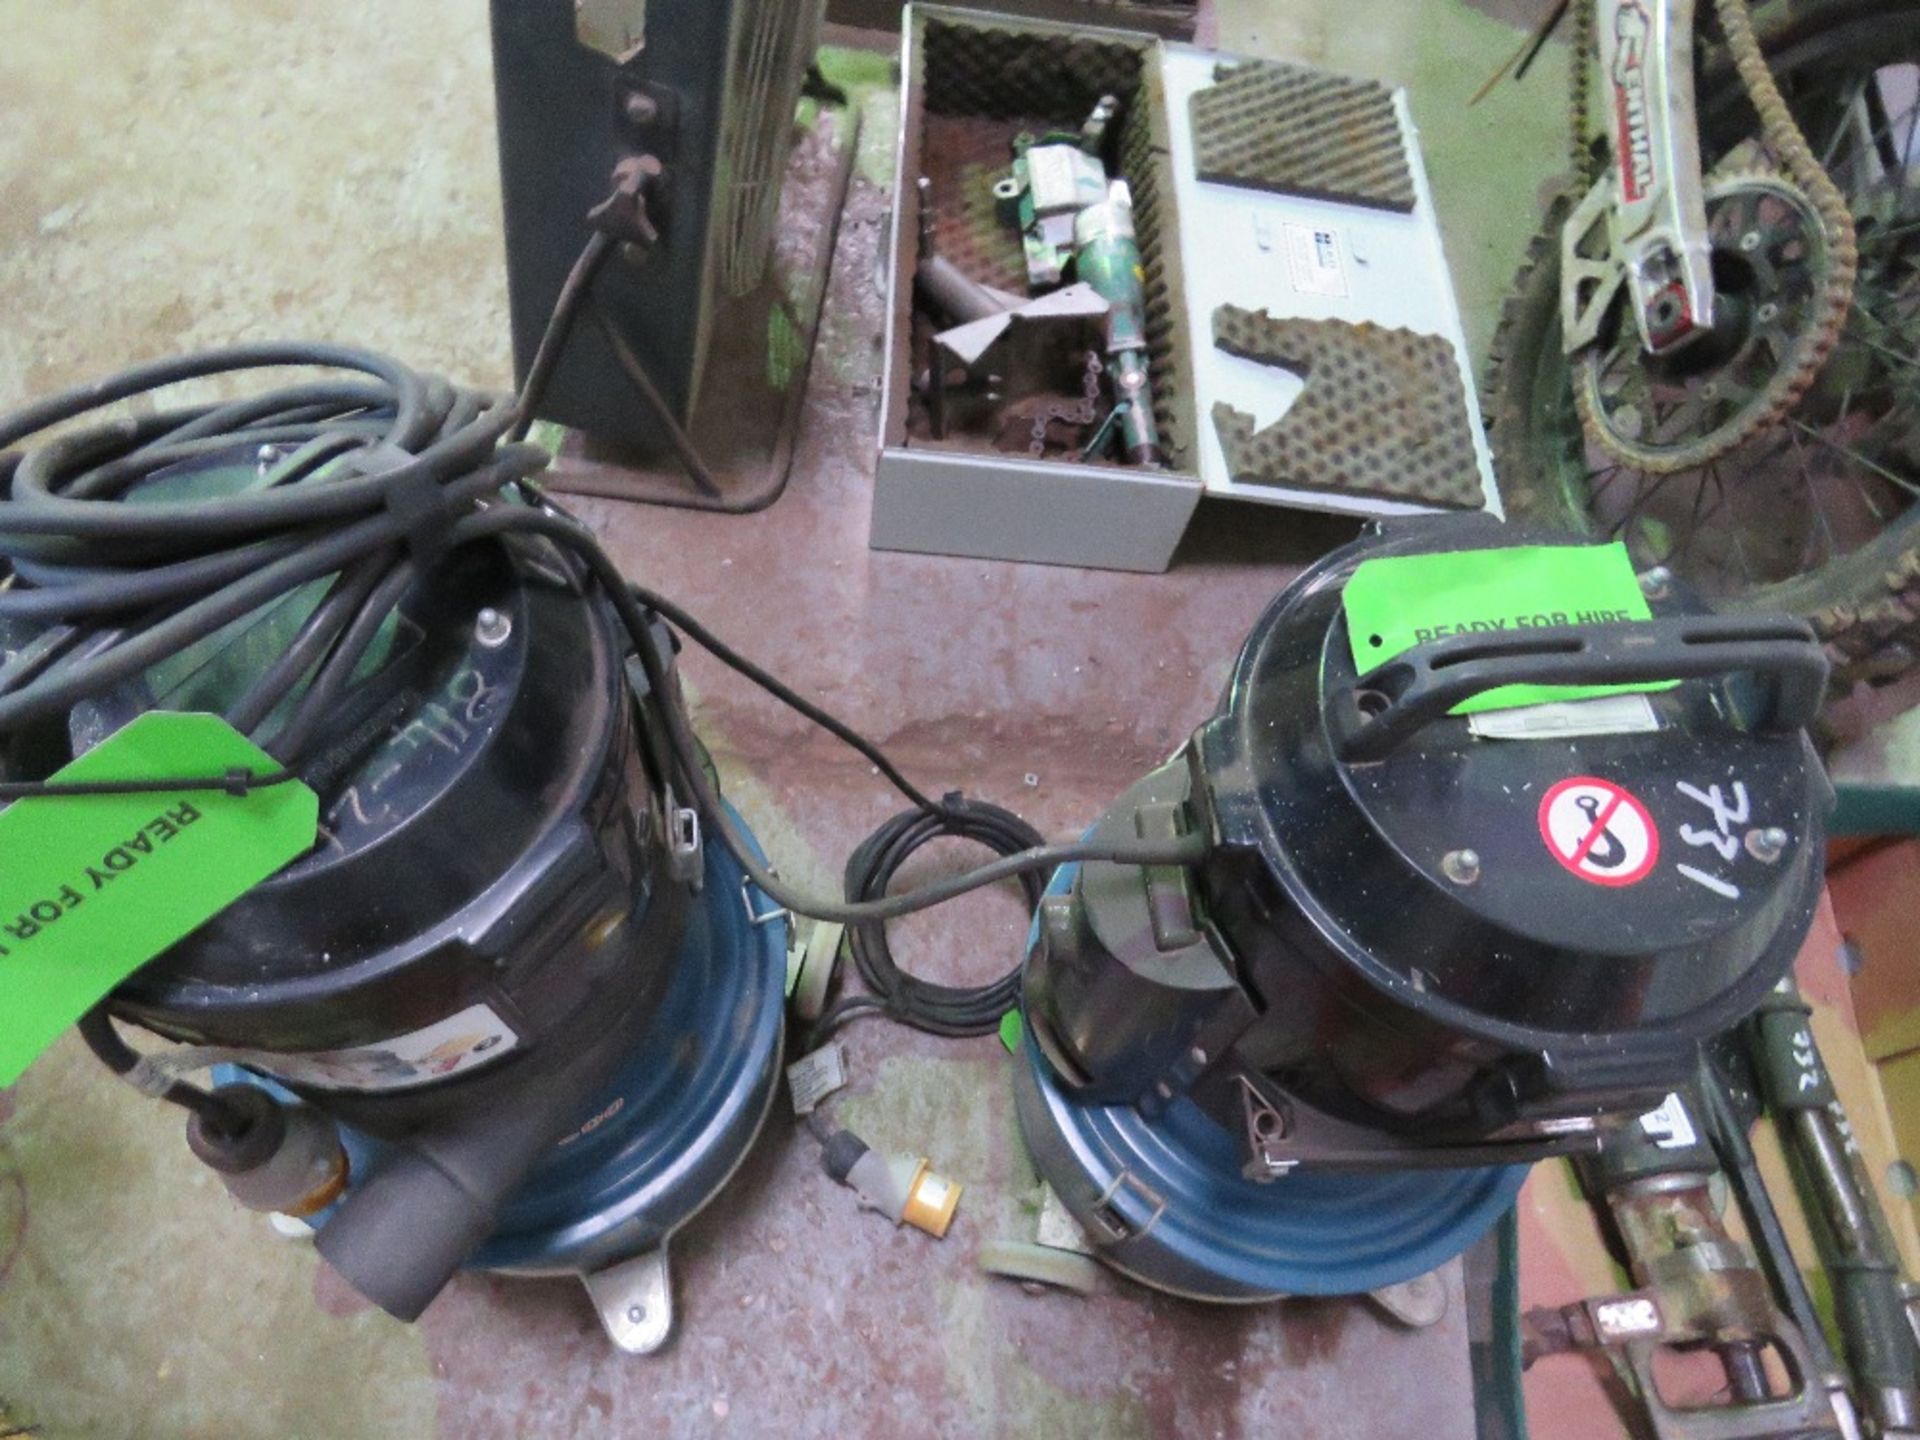 2 X 110 VOLT DUST EXTRACTORS. DIRECT FROM LOCAL COMPANY DUE TO DEPOT CLOSURE. - Image 2 of 2